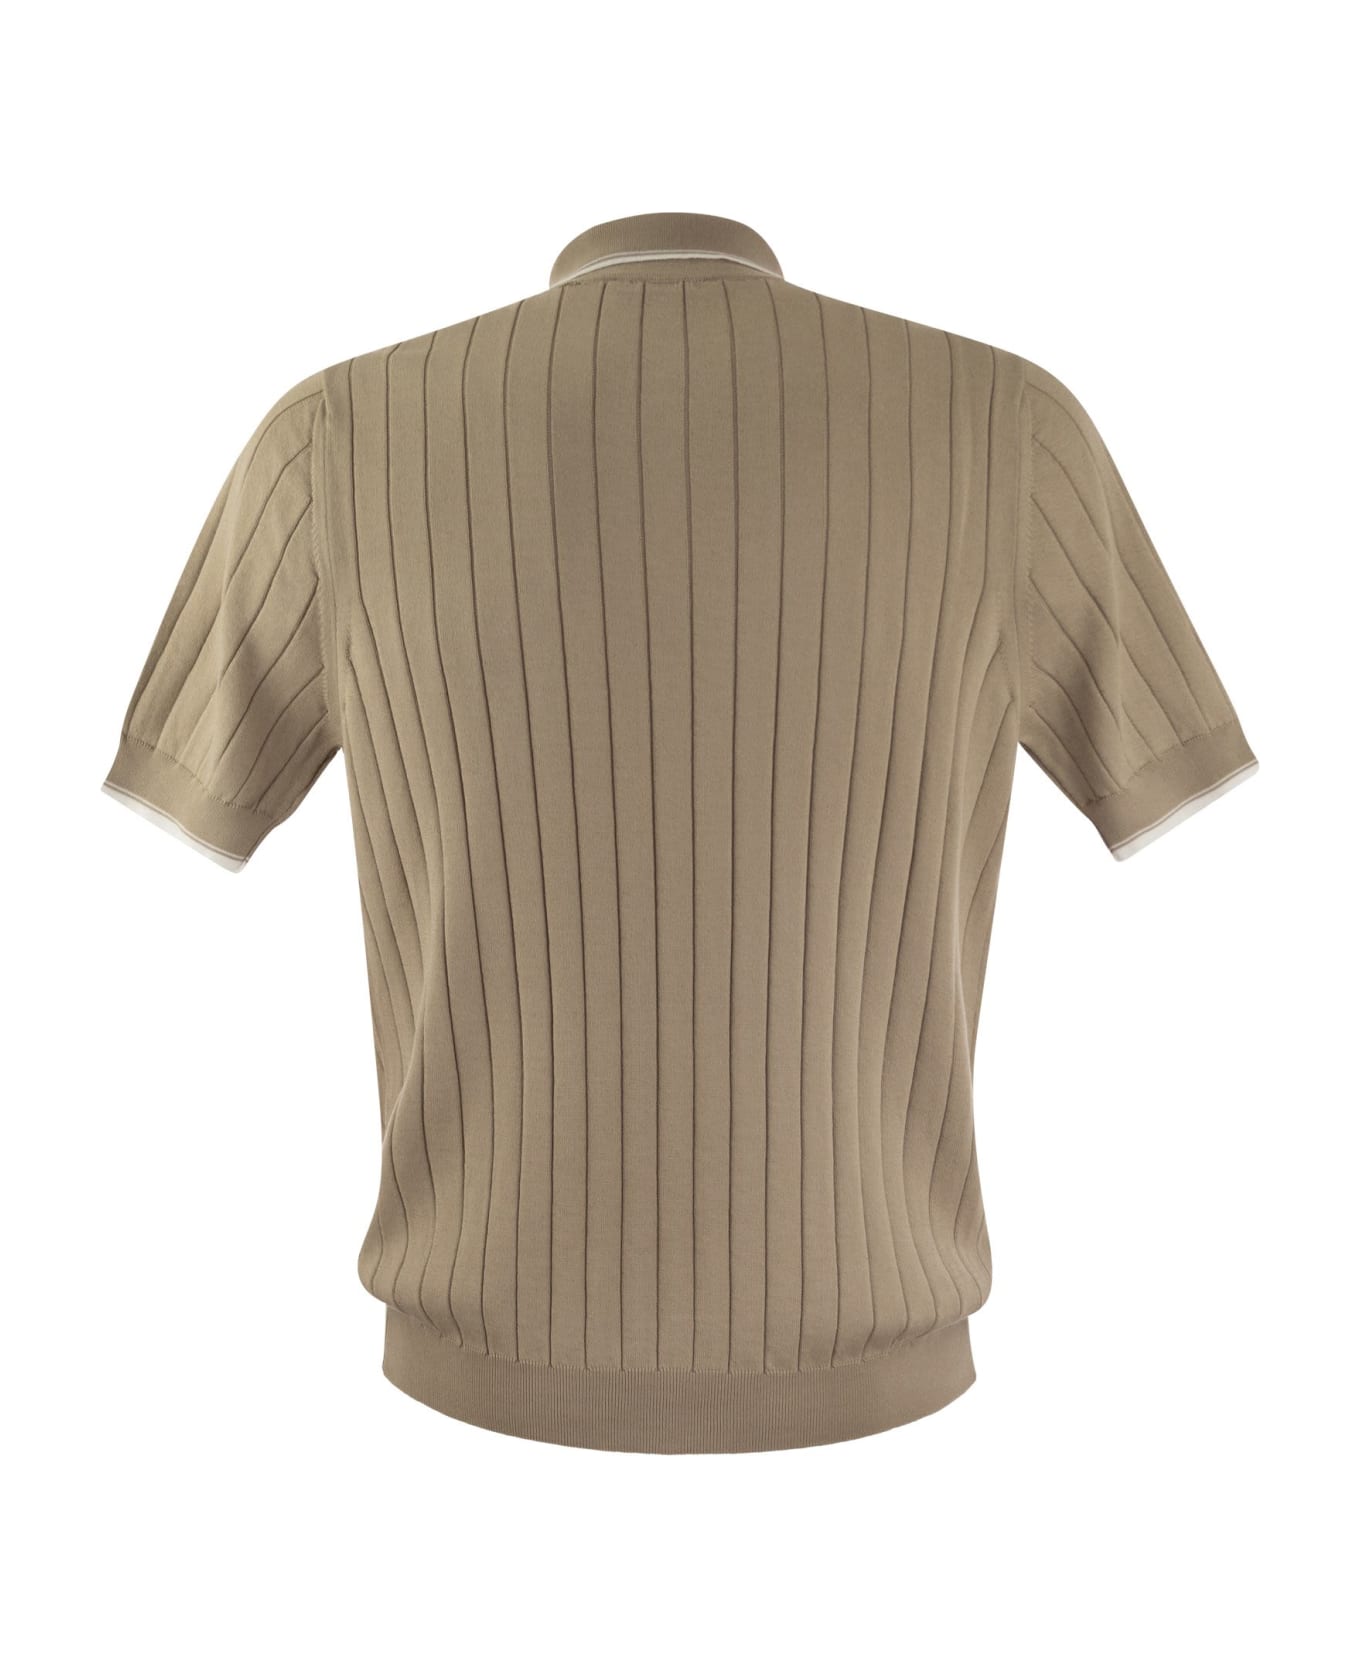 Peserico Polo Shirt In Pure Cotton Crepe Yarn With Flat Rib - Beige/white